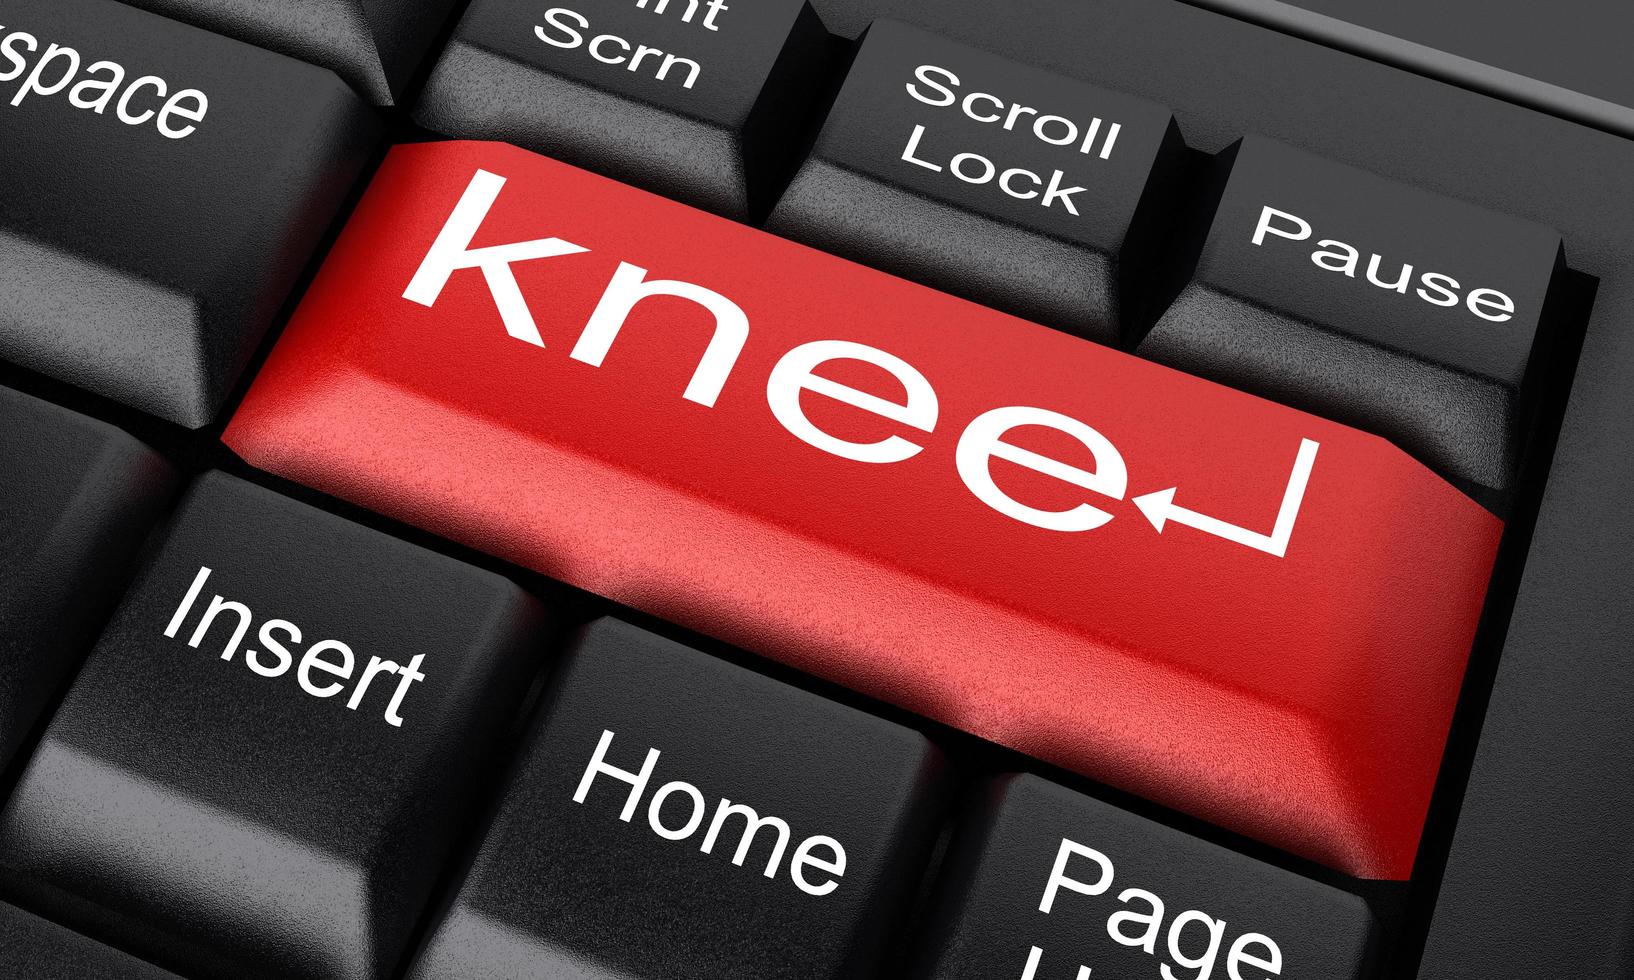 knee word on red keyboard button photo